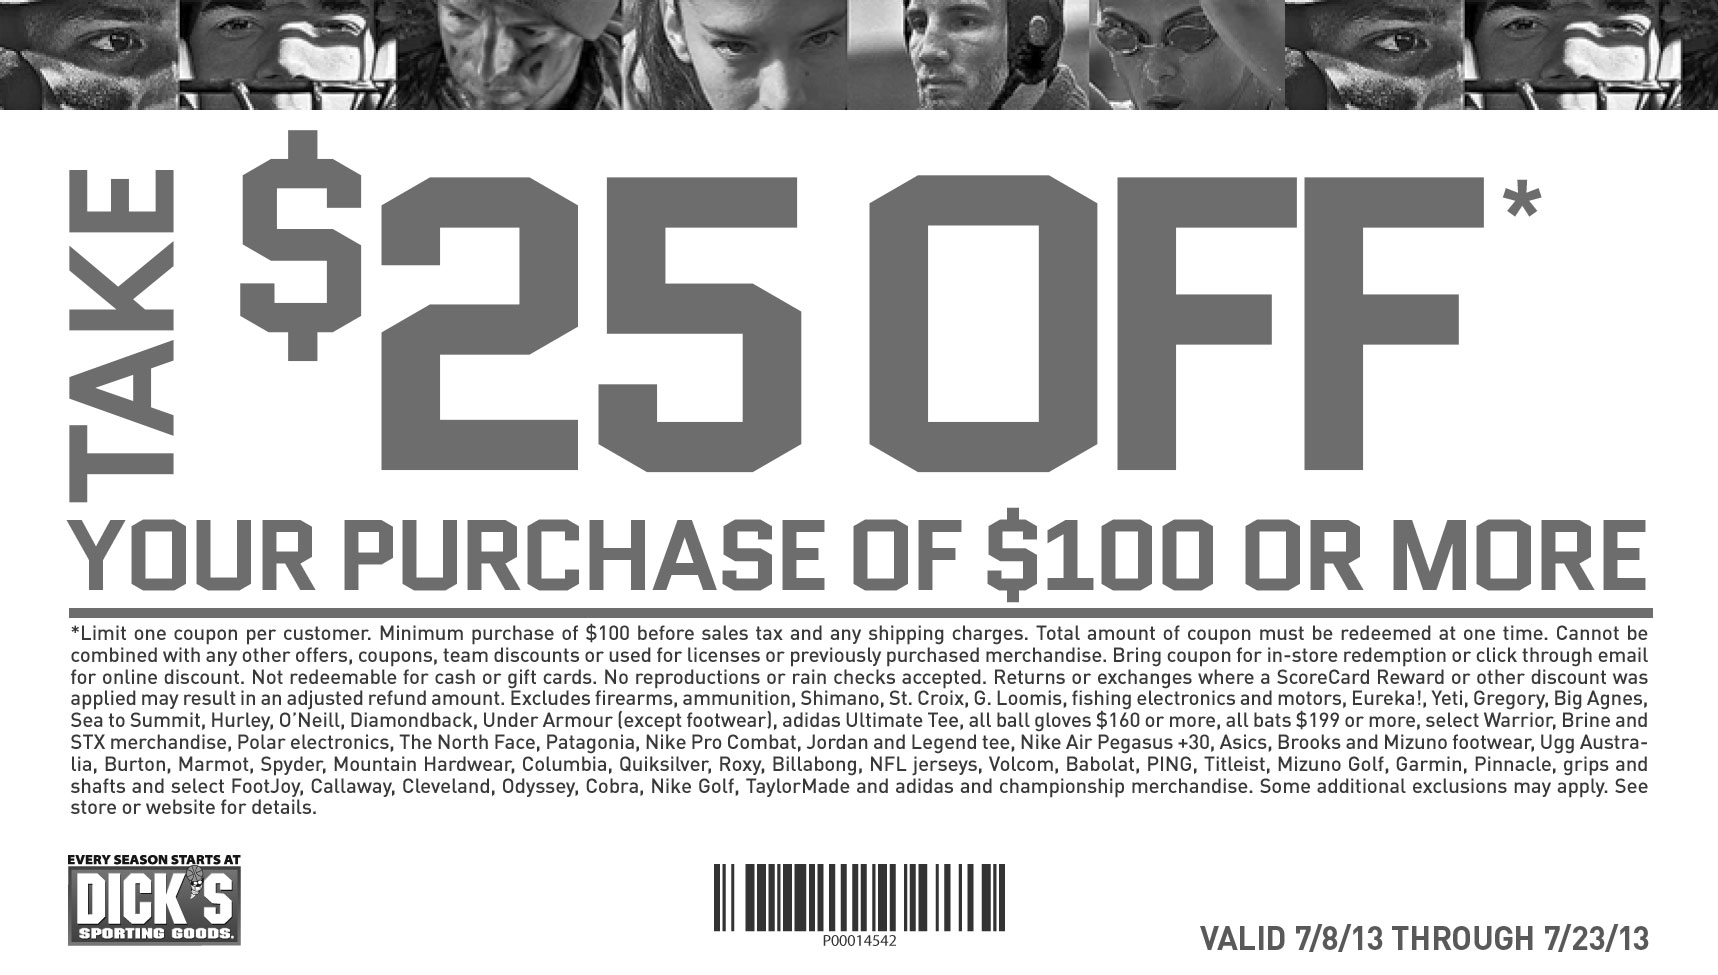 Take $25 off. your purchase of $100 or more. Limit one coupon per customer. 
						Minimum purchase of $100 before sales tax. Online minimum purchase of $100 before taxes and shipping charges.Total amount of coupon must 
						be redeemed at one time. Cannot be combined with any other offers, coupons, team discounts or Guaranteed In-Stock markdown, or used for 
						licenses or previously purchased merchandise. Bring coupon for in-store redemption or click through email for online discount. Online code 
						excludes tax and shipping. Not redeemable for cash, gift cards or store credit. No reproductions or rain checks accepted. Returns or exchanges 
						where a ScoreCard Reward or other discount was applied may result in an adjusted refund amount. Excludes firearms, ammunition, Shimano, 
						St. Croix, G. Loomis, fishing electronics and motors, Eureka!, Yeti, Gregory, Big Agnes, Sea to Summit, Hurley, O’Neill, Diamondback, Under 
						Armour (except footwear), adidas Ultimate Tee, all ball gloves $160 or more, all bats $199 or more, select Warrior, Brine and STX merchandise, 
						Polar electronics, The North Face, Patagonia, Nike Pro Combat, Jordan and Legend tee, Nike Air Pegasus +30, Asics, Brooks and Mizuno footwear, 
						Ugg Australia, Burton, Marmot, Spyder, Mountain Hardwear, Columbia, Quiksilver, Roxy, Billabong, NFL jerseys, Volcom, Babolat, PING, Titleist, 
						Mizuno Golf, Garmin, Pinnacle, grips and shafts and select FootJoy, Callaway, Cleveland, Odyssey, Cobra, Nike Golf, TaylorMade and adidas and 
						championship merchandise. Some additional exclusions may apply. See store or website for details.